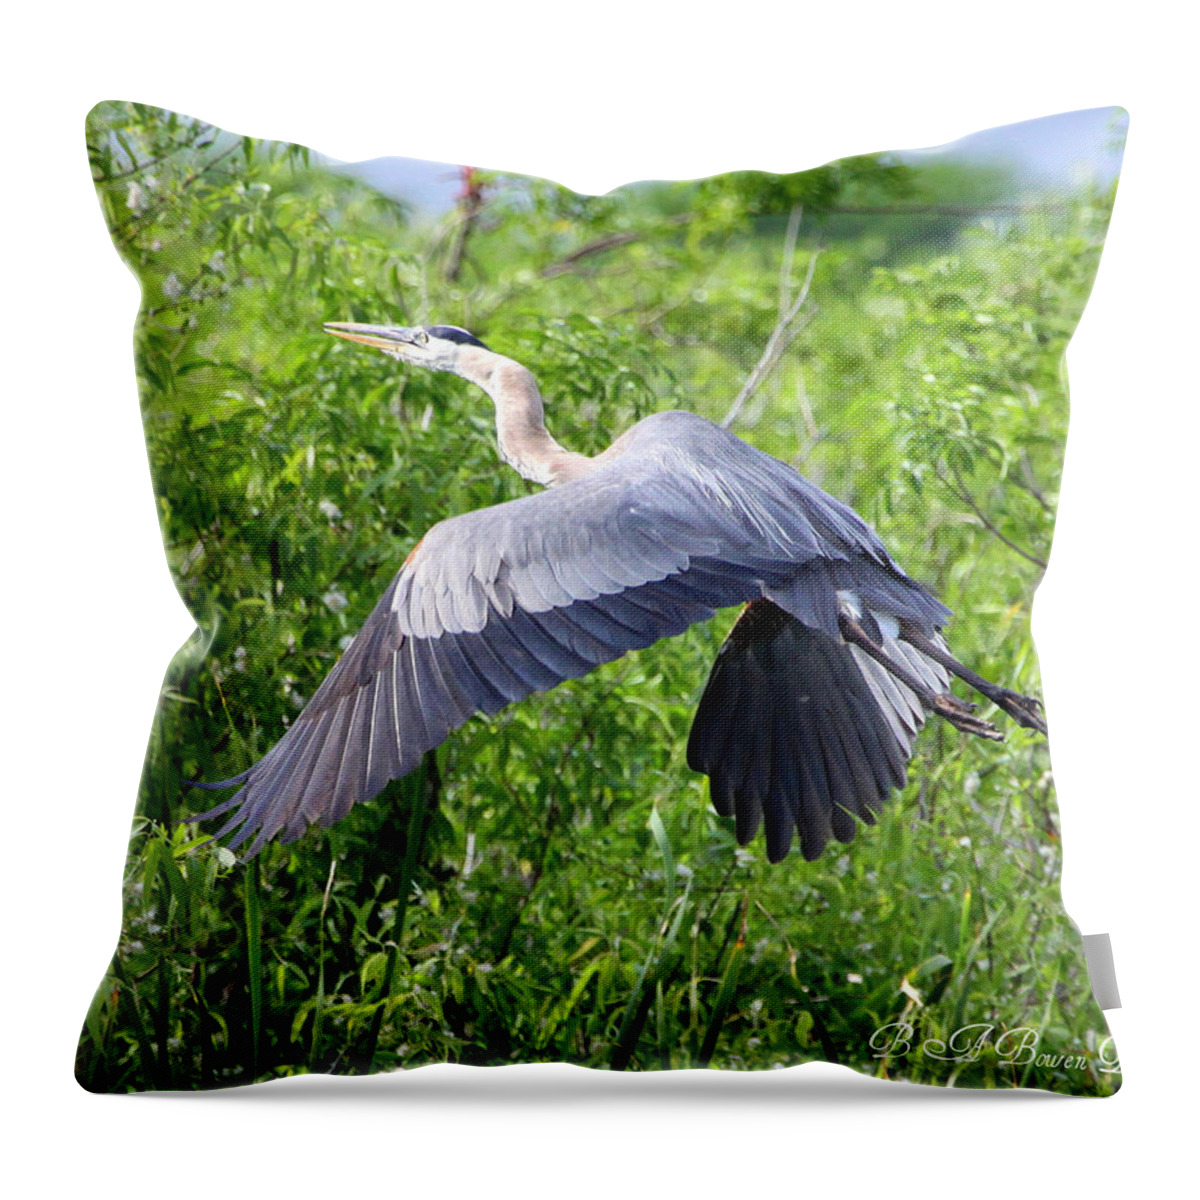 Great Blue Heron Throw Pillow featuring the photograph Great Blue Heron Takeoff by Barbara Bowen